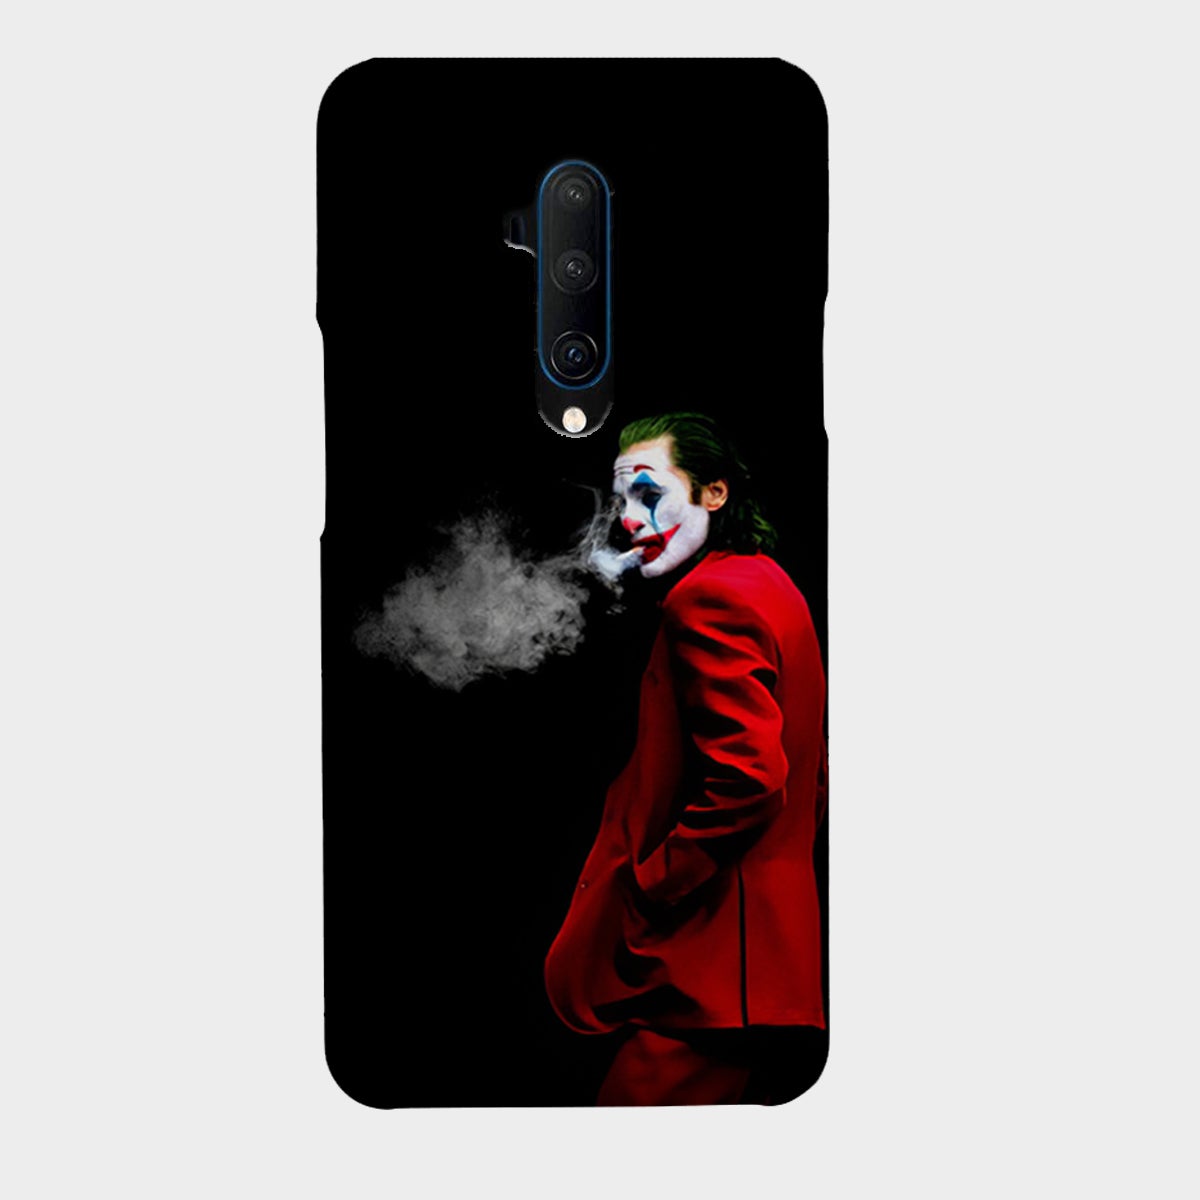 The Joker - Red Suit - Mobile Phone Cover - Hard Case - OnePlus